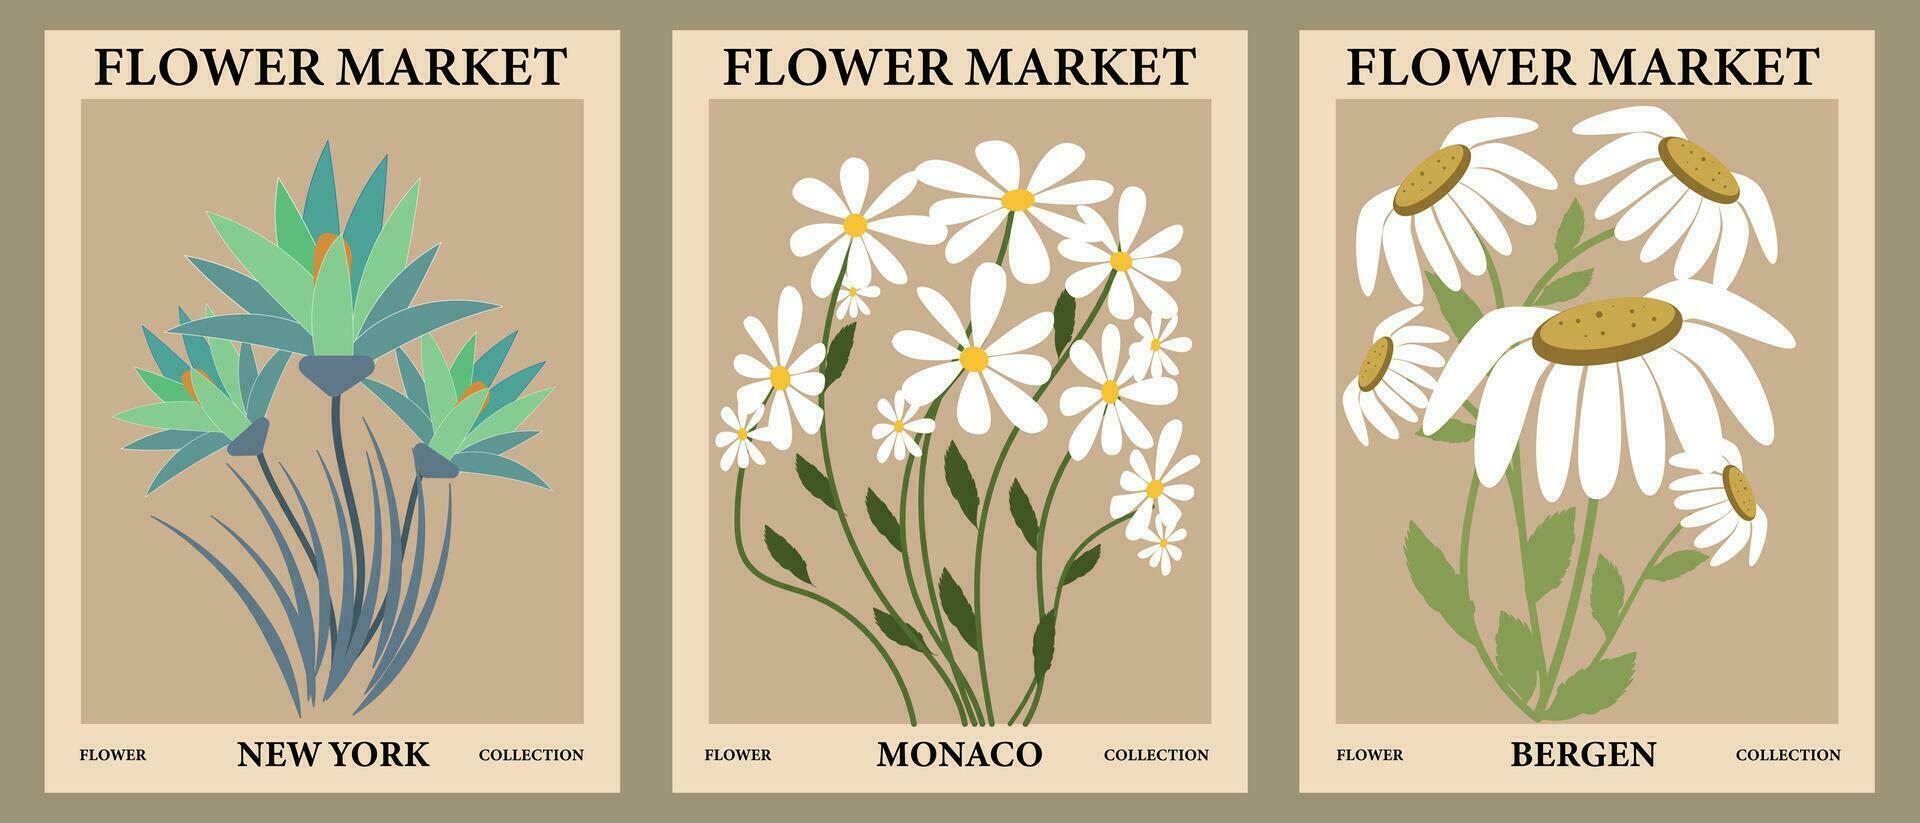 Set of daisy flower market posters.Abstract floral illustration. Template for cards, wall art, banner, background. Vector illustration.